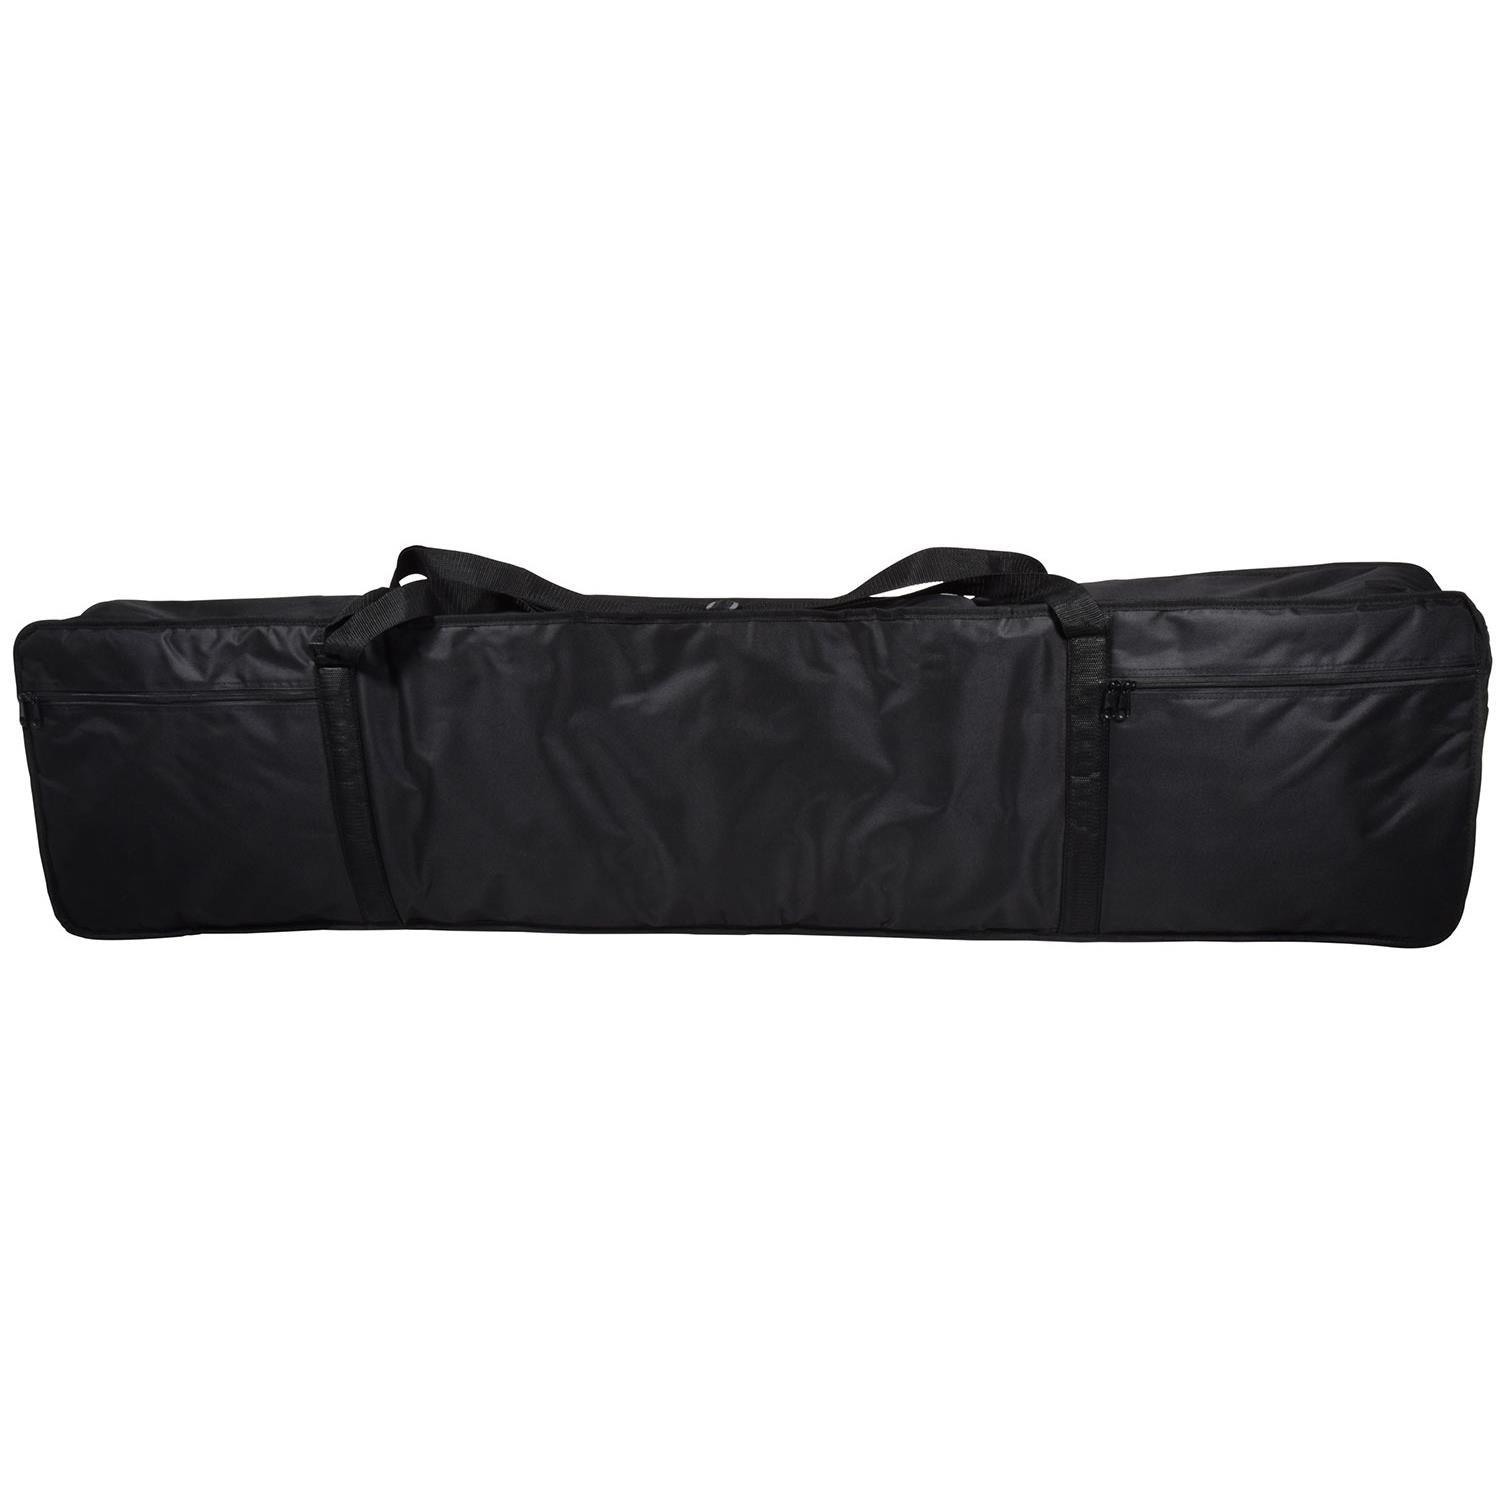 Chord 88 Key Stage Piano Bag - DY Pro Audio